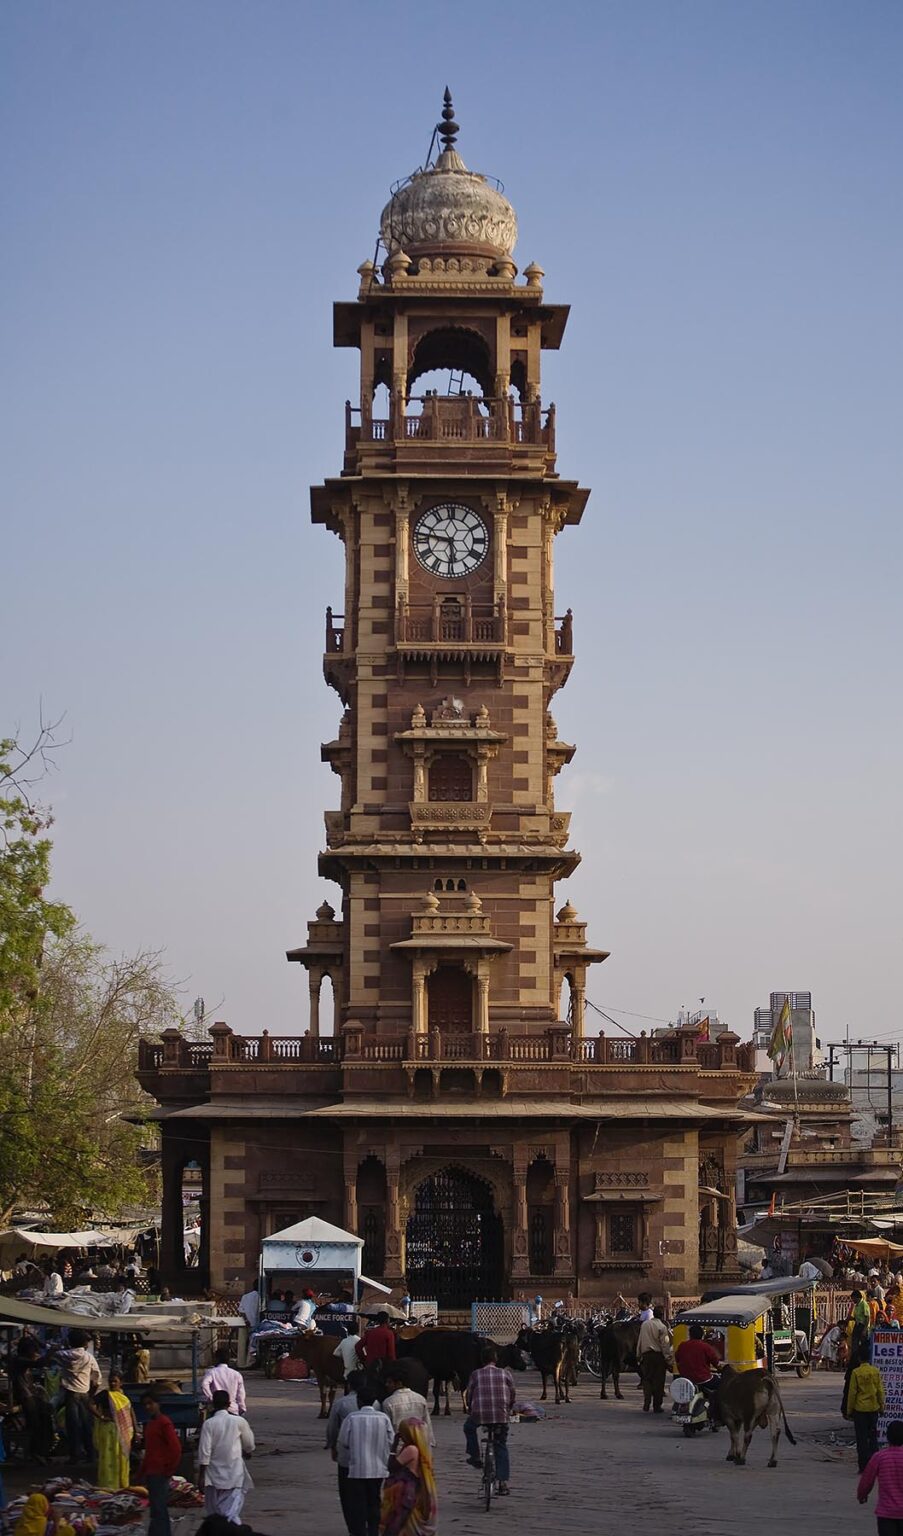 The CLOCK TOWER is the heart of JOHDPUR also known as the BLUE CITY - RAJASTHAN, INDIA